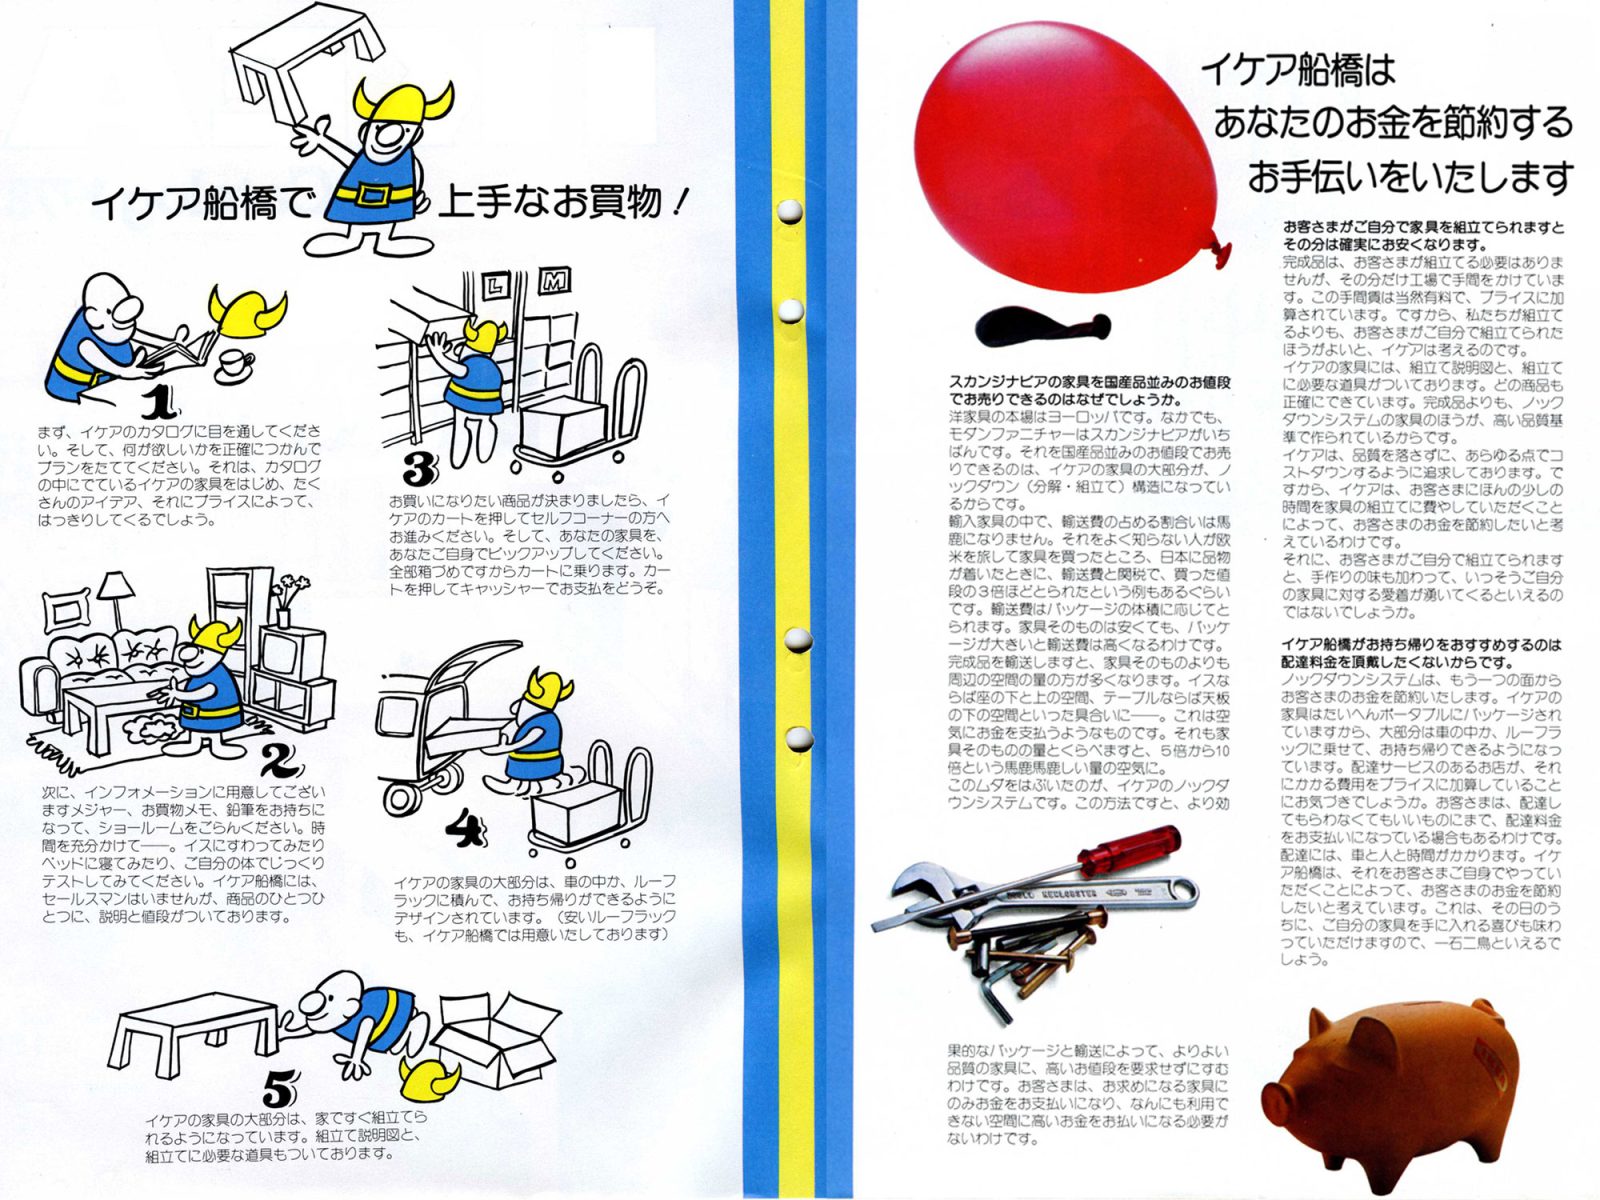 Facsimile of two pages from the 1978 Japanese IKEA catalogue, one with shopping instructions.